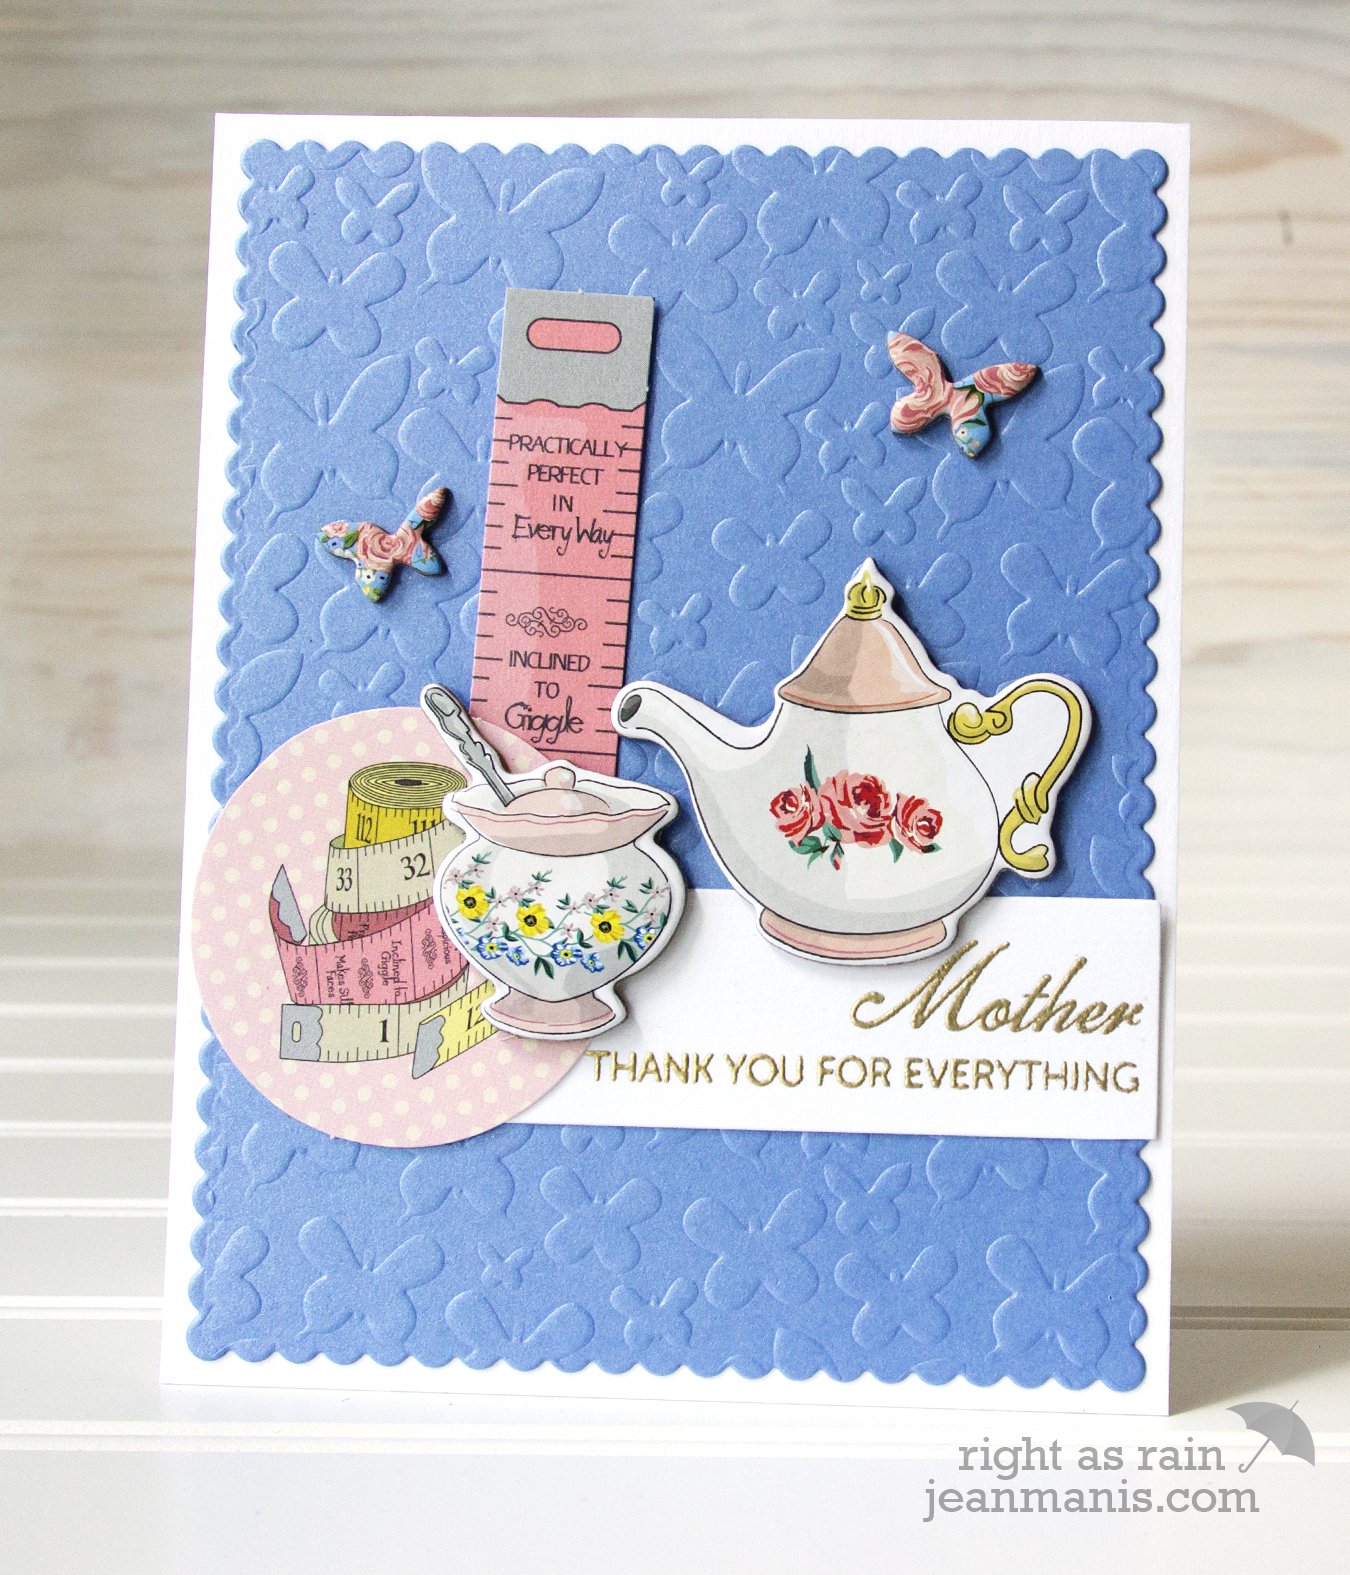 “Mary Poppins”-inspired Mother’s Day card